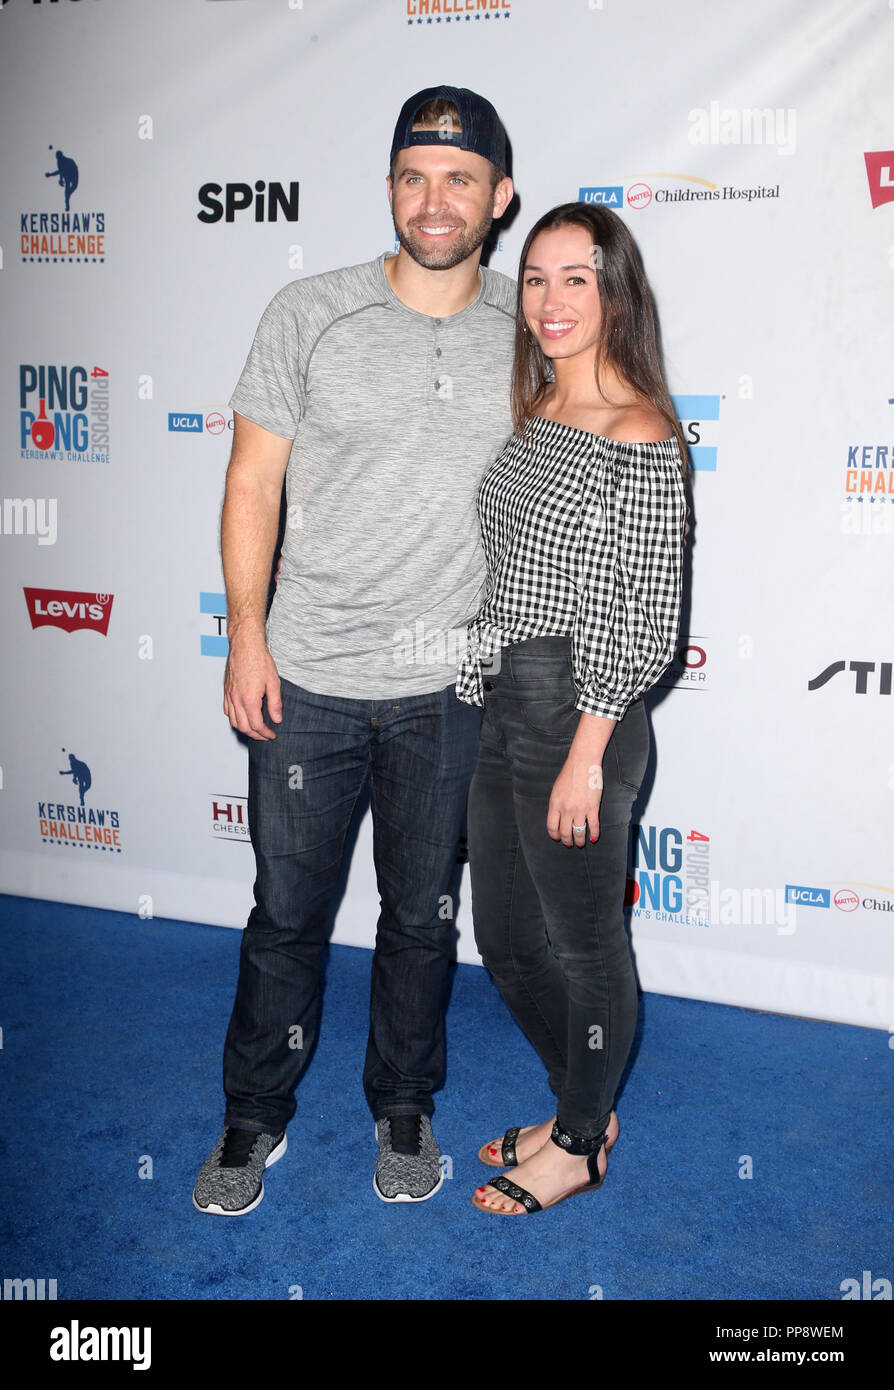 6th Annual PingPong4Purpose Featuring: Brian Dozier, Renee Hrapmann Dozier  Where: Los Angeles, California, United States When: 23 Aug 2018 Credit:  FayesVision/WENN.com Stock Photo - Alamy